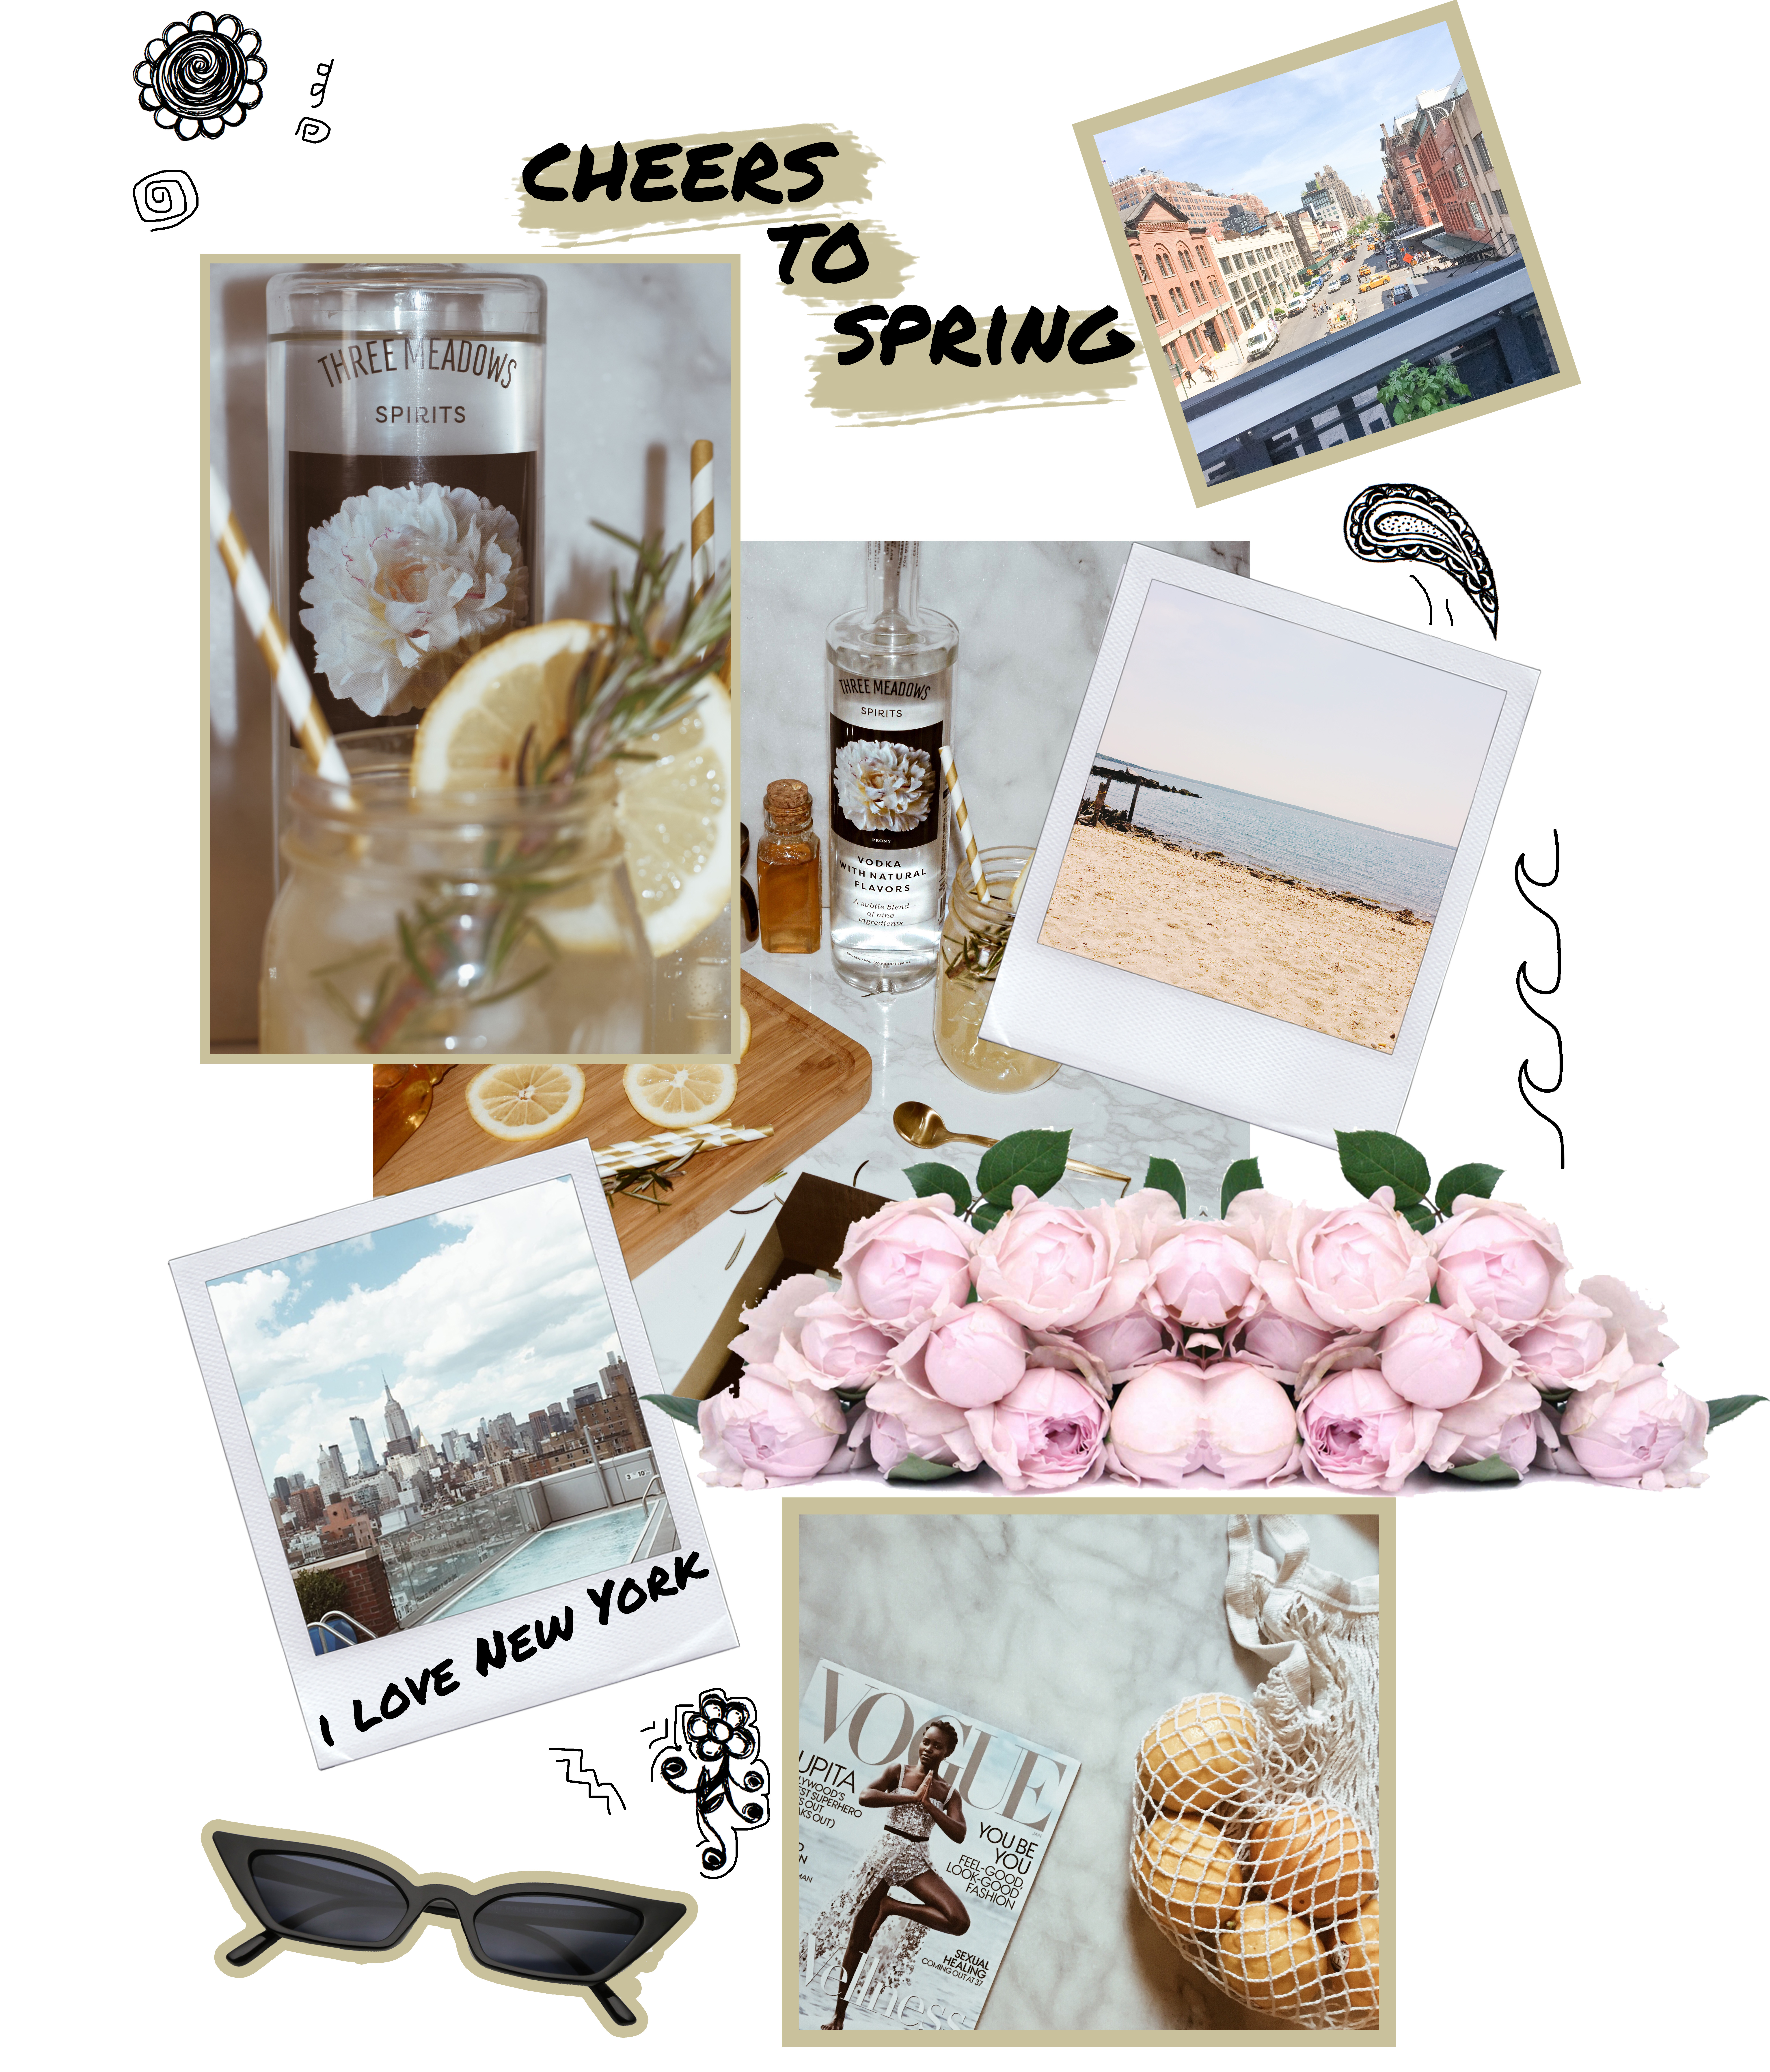 Peony Vodka-collage-cocktail-spring-2018-drinks-cheers-new york city-lifestyle-blogger